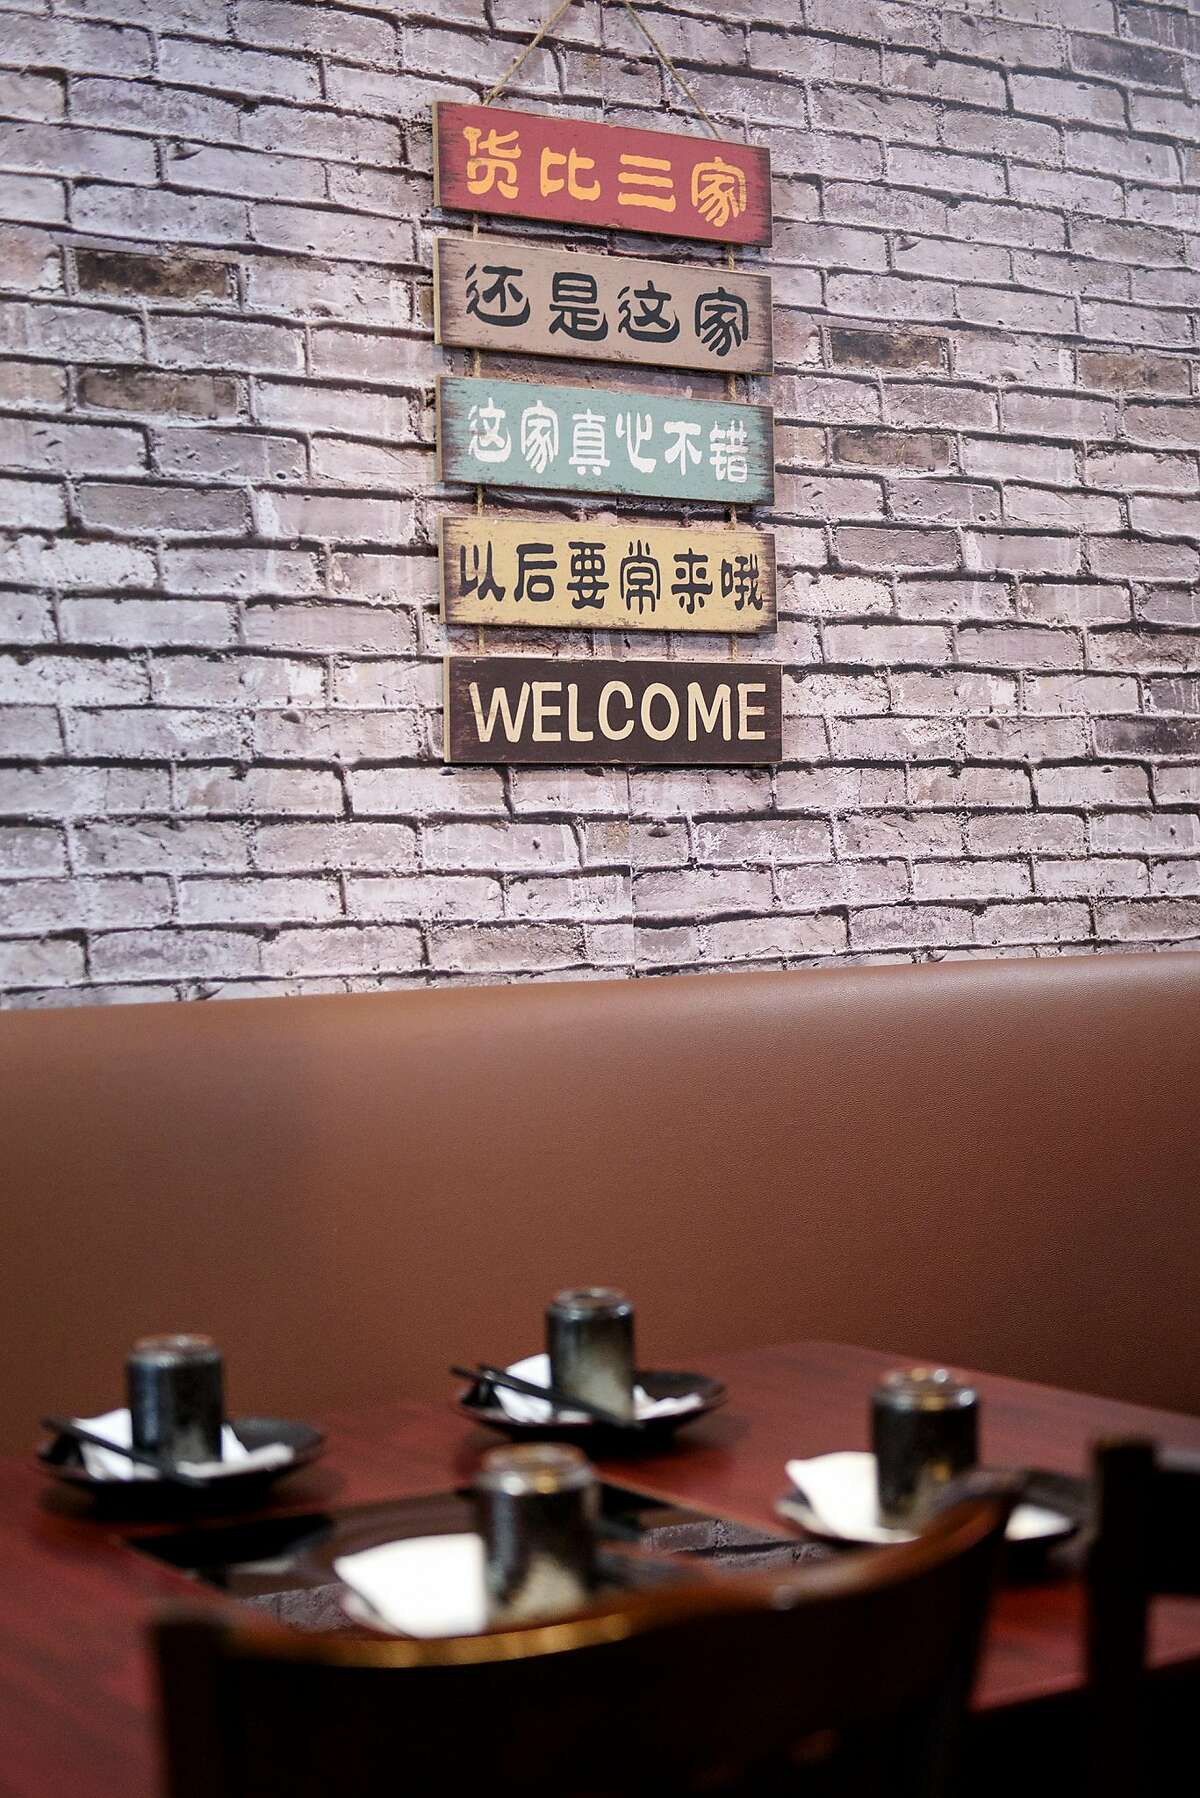 A welcome sign hangs on the wall at Woija Hunan Cuisine in Albany, Calif., on Thursday March 28, 2019.